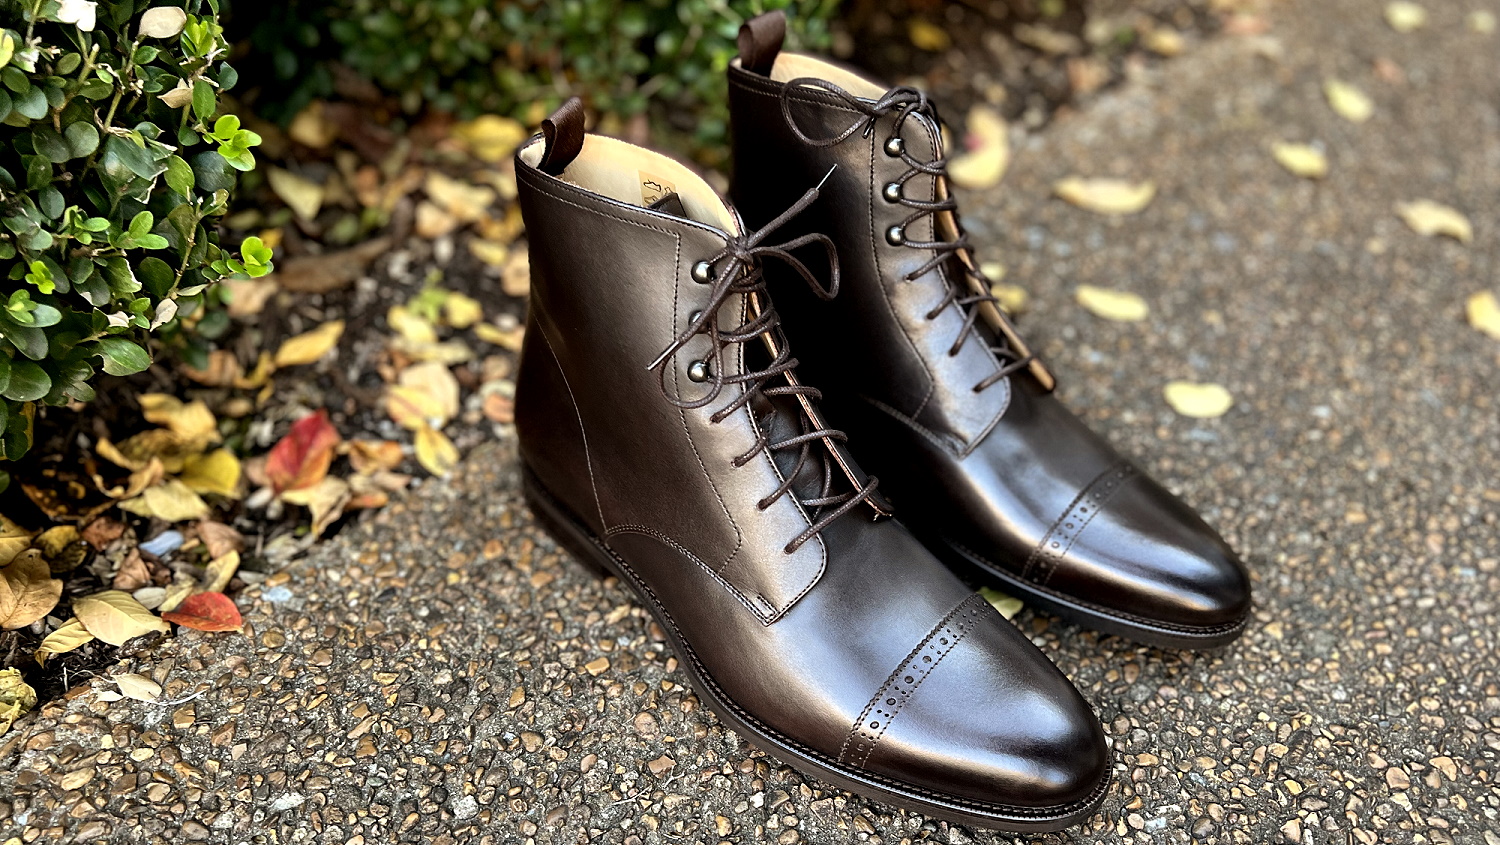 In Review: Suitsupply Brown Lace-Up Boots